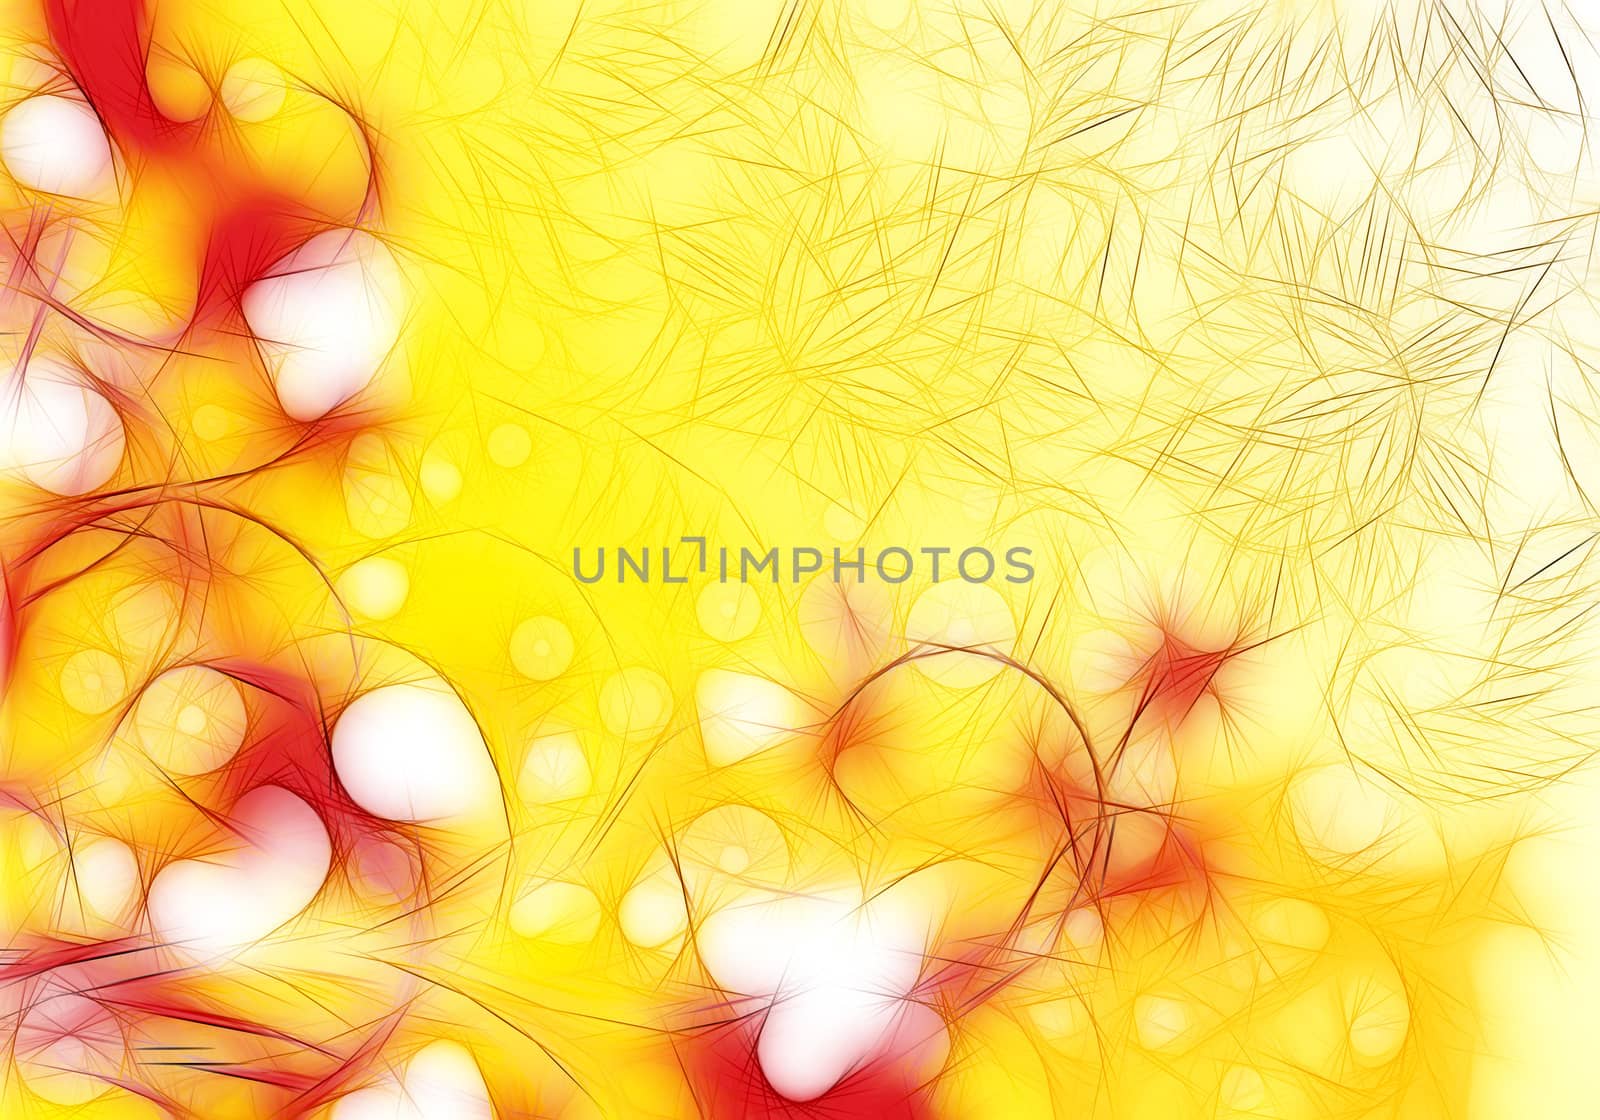 abstract modern background with floral elements, vector illustration